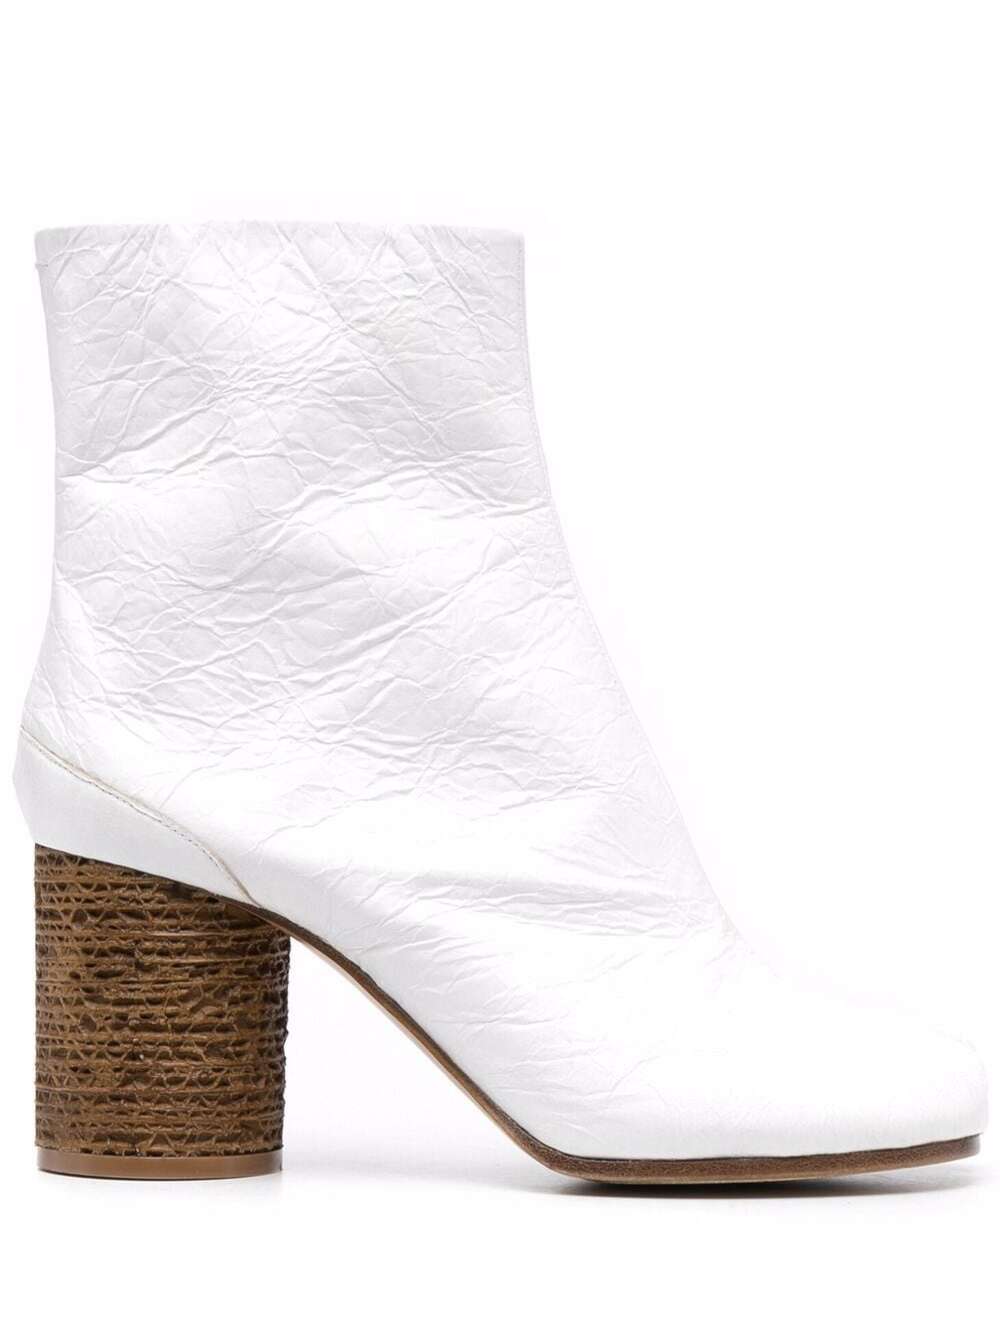 Maison Margiela Womans Tabi White Leather Ankle Boots With Crease Effect